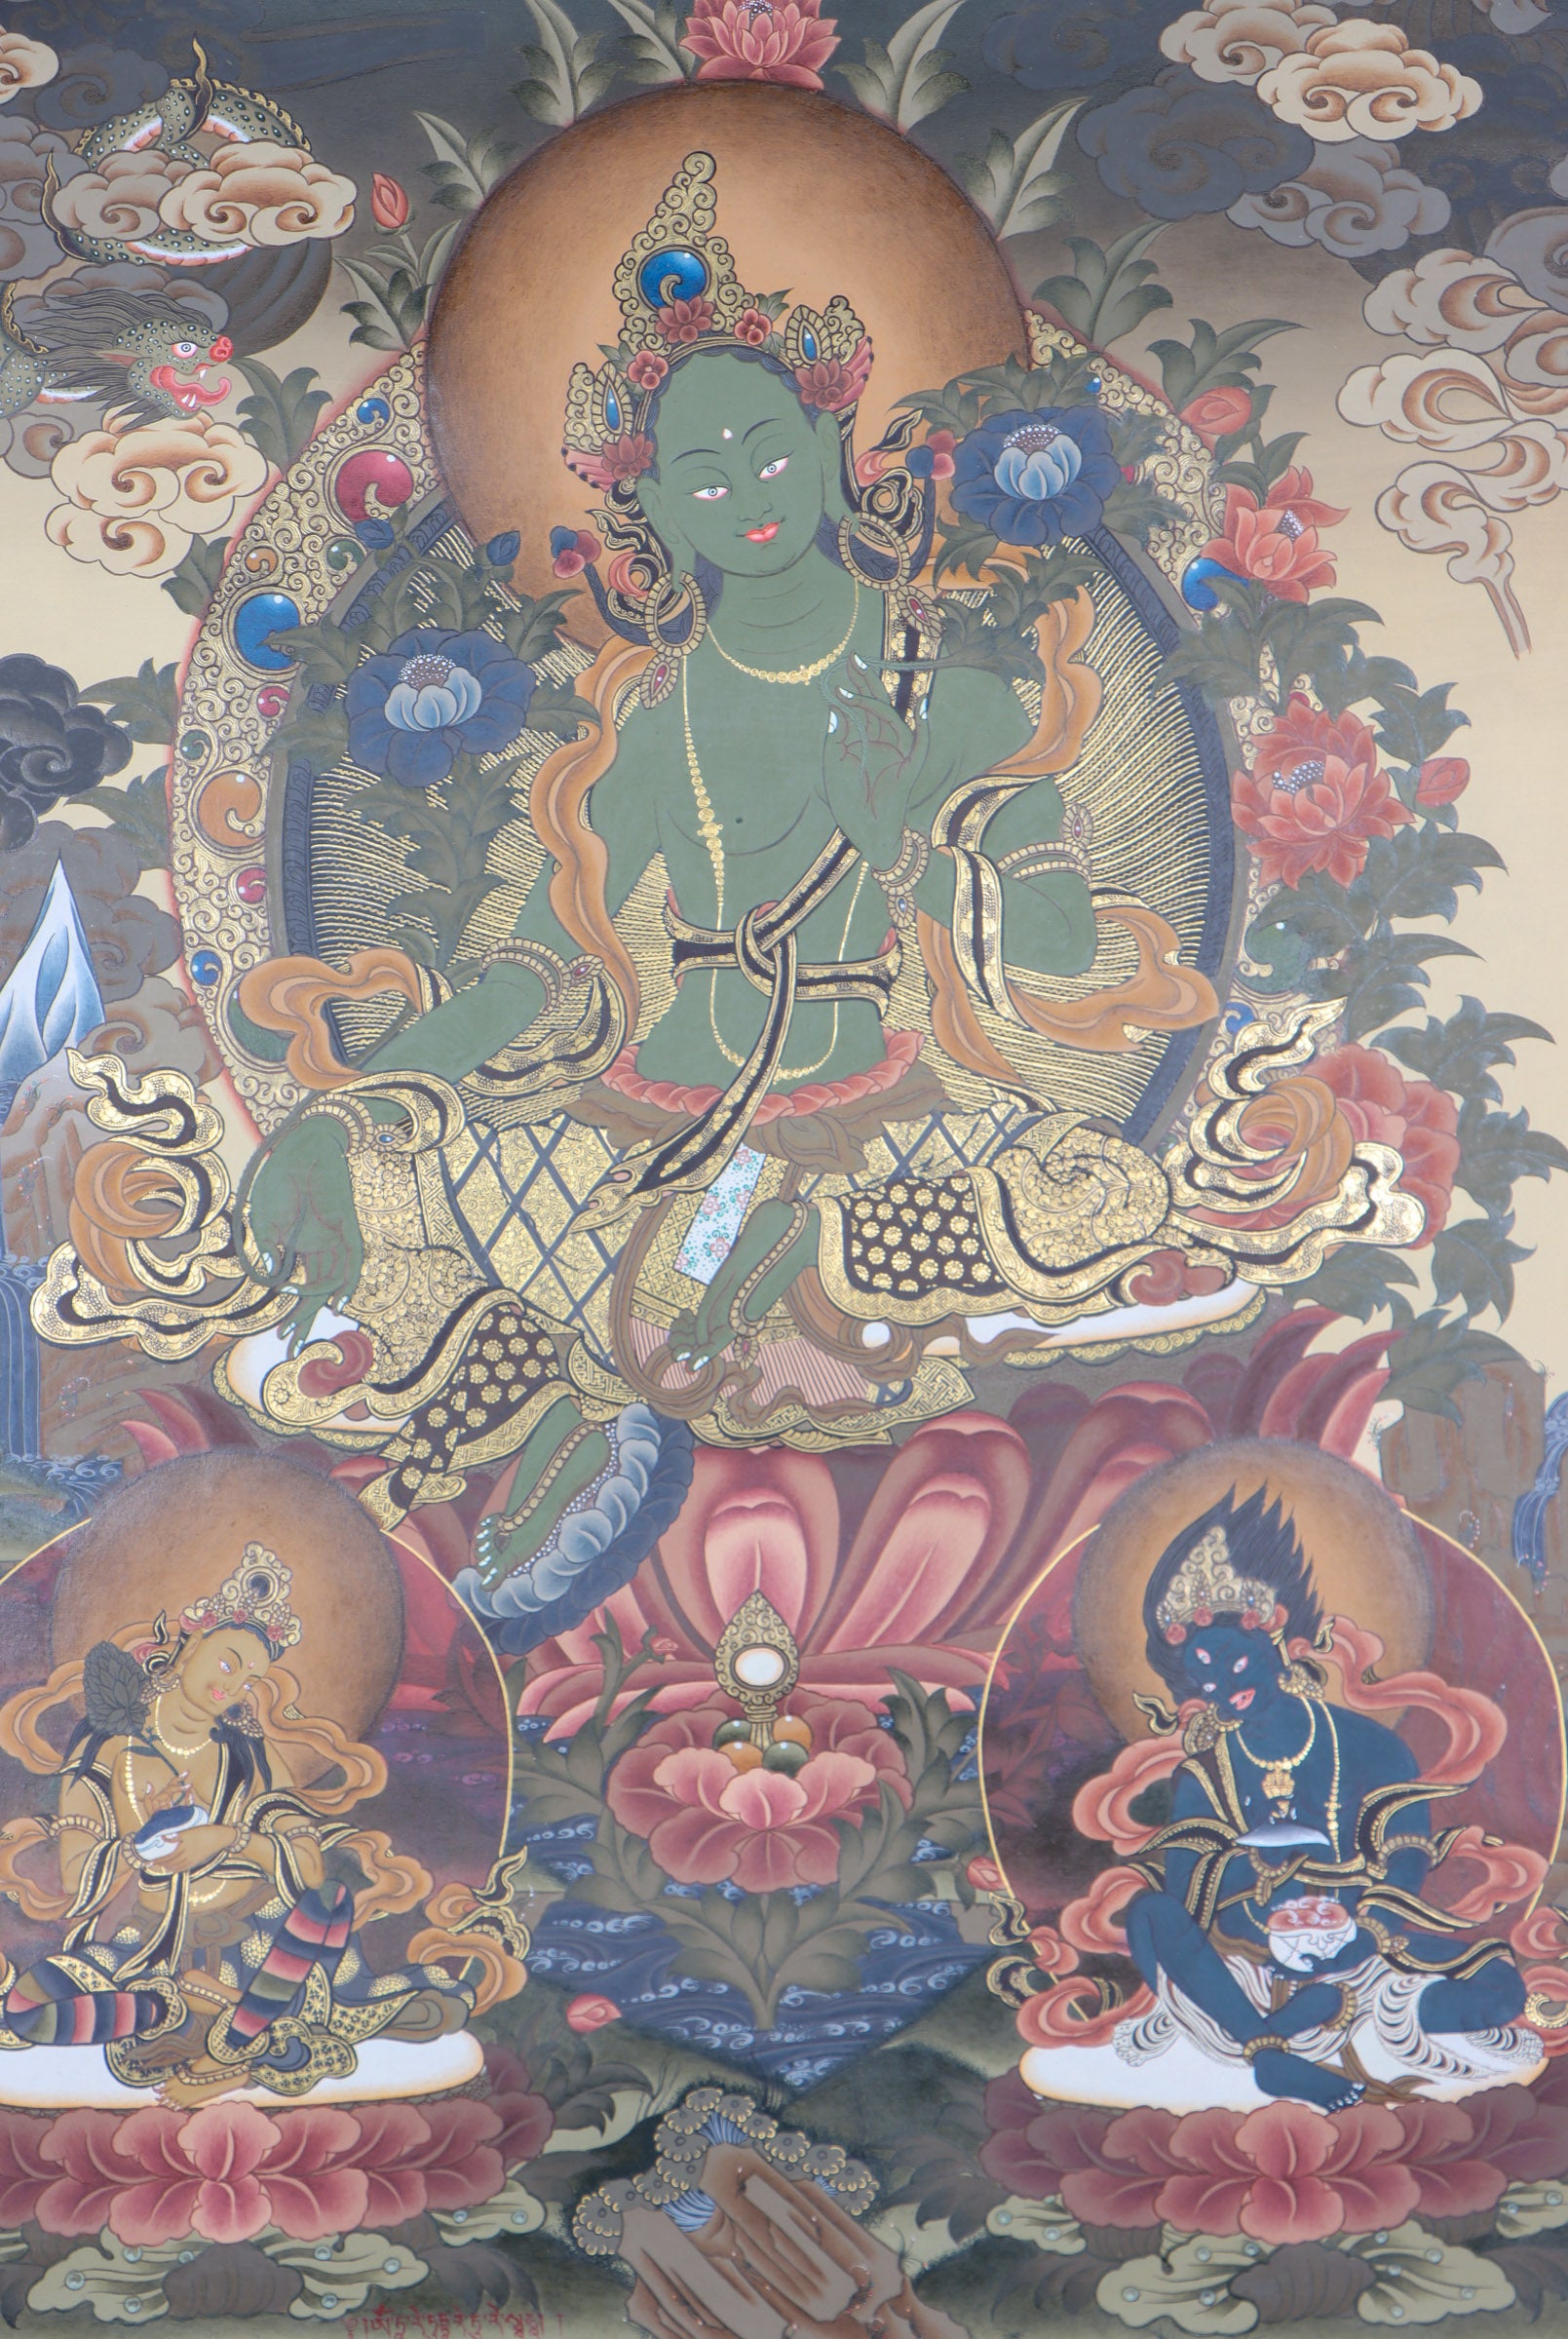 Green Tara Thangka Painting for protection, healing, and the removal of obstacles.